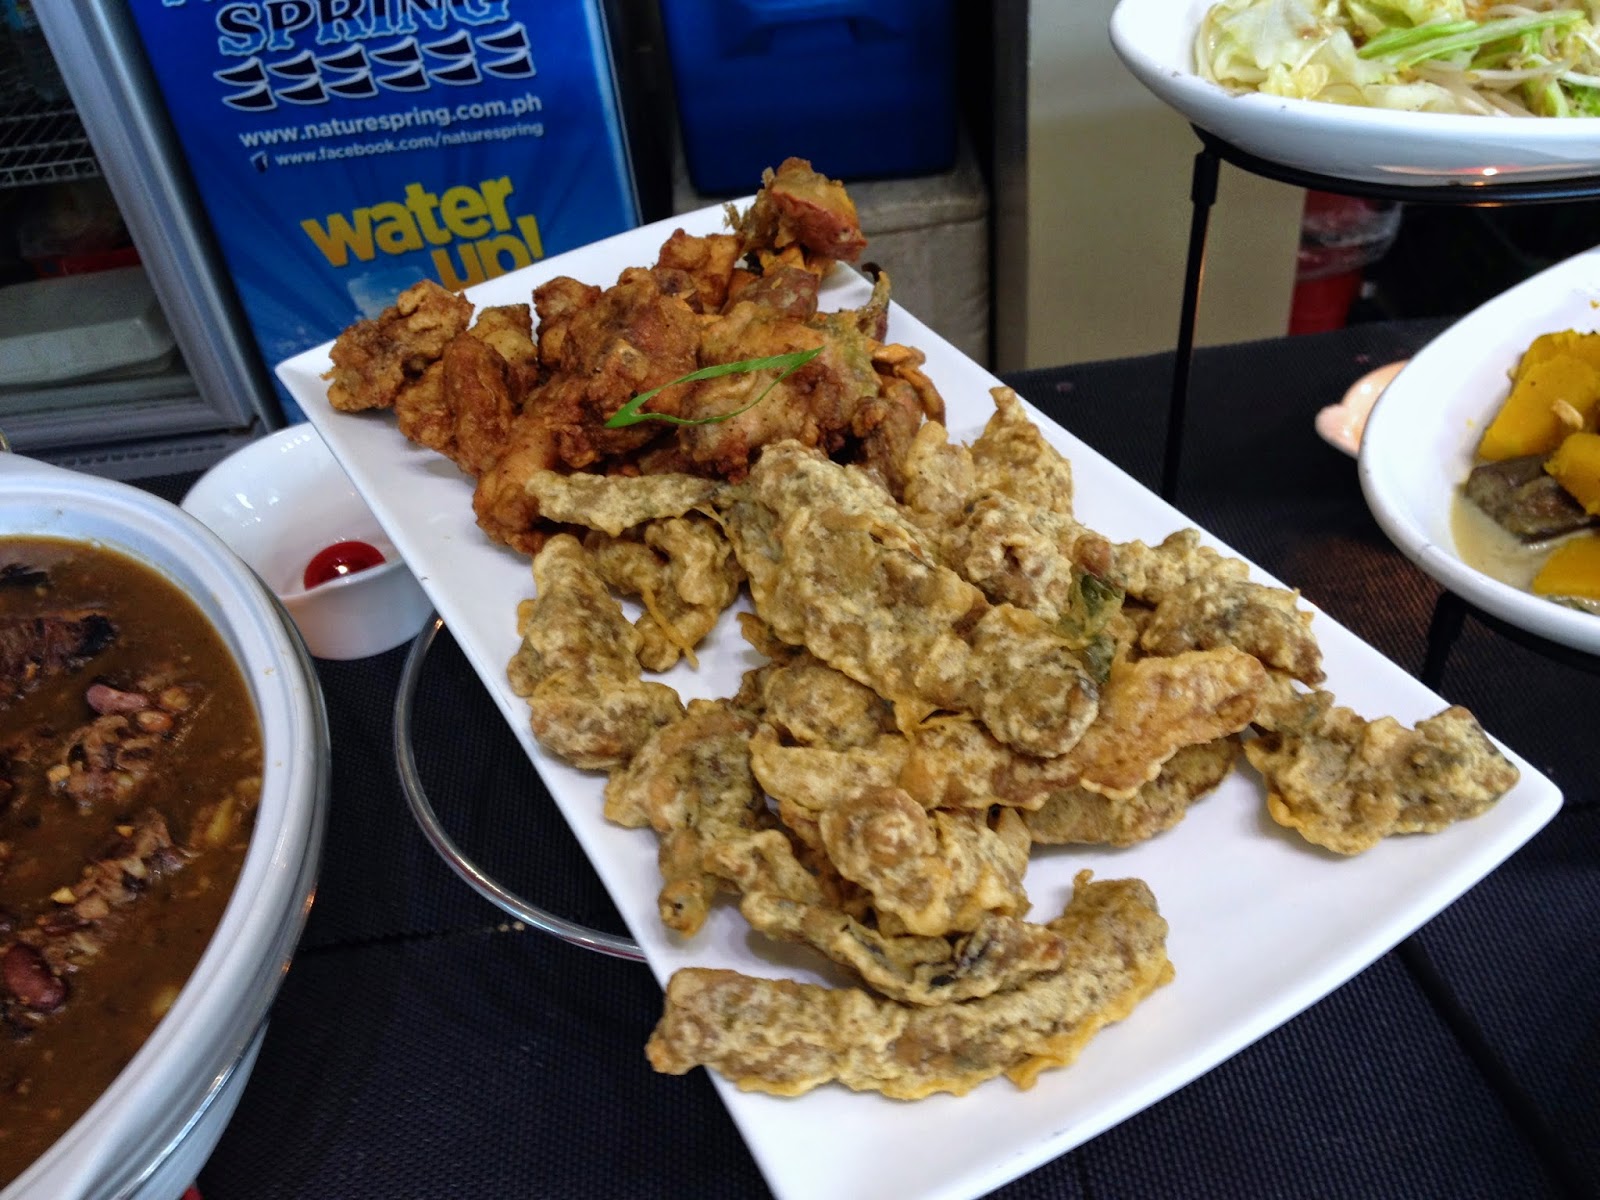 Isidra Comfort Cantina's vegetable chips and fried chicken